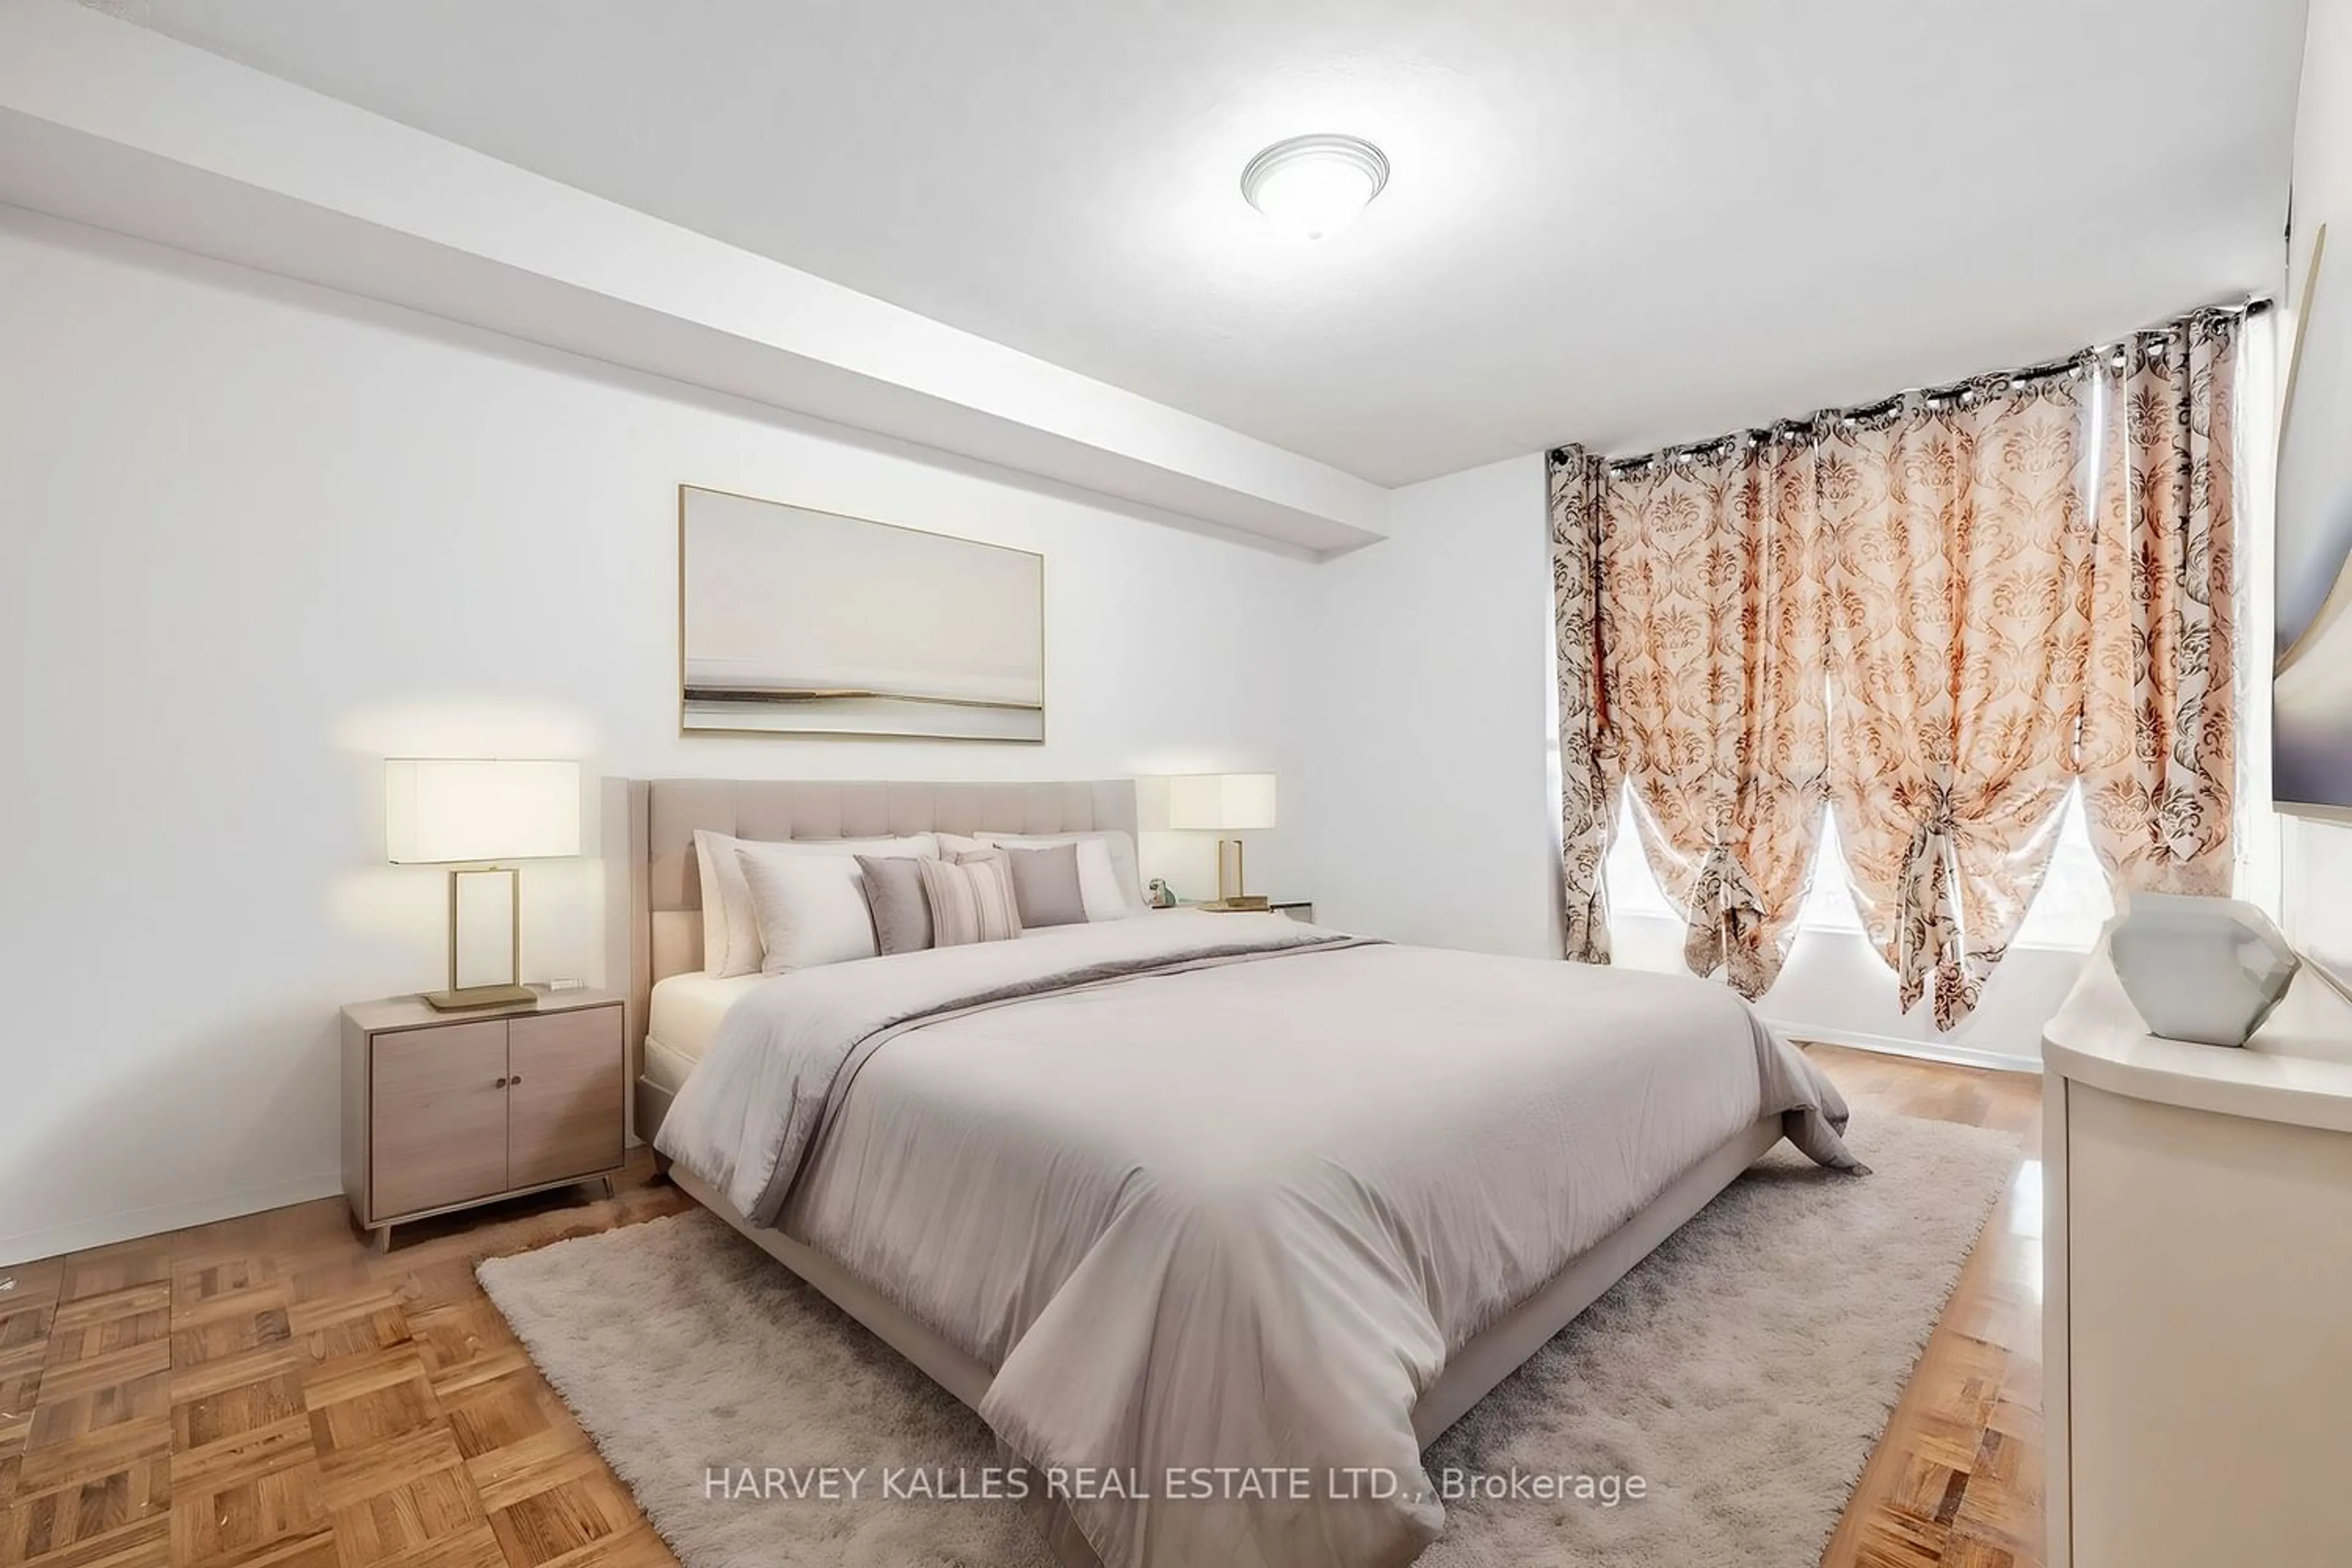 A pic of a room for 3077 Weston Rd ##1612, Toronto Ontario M9M 3A1